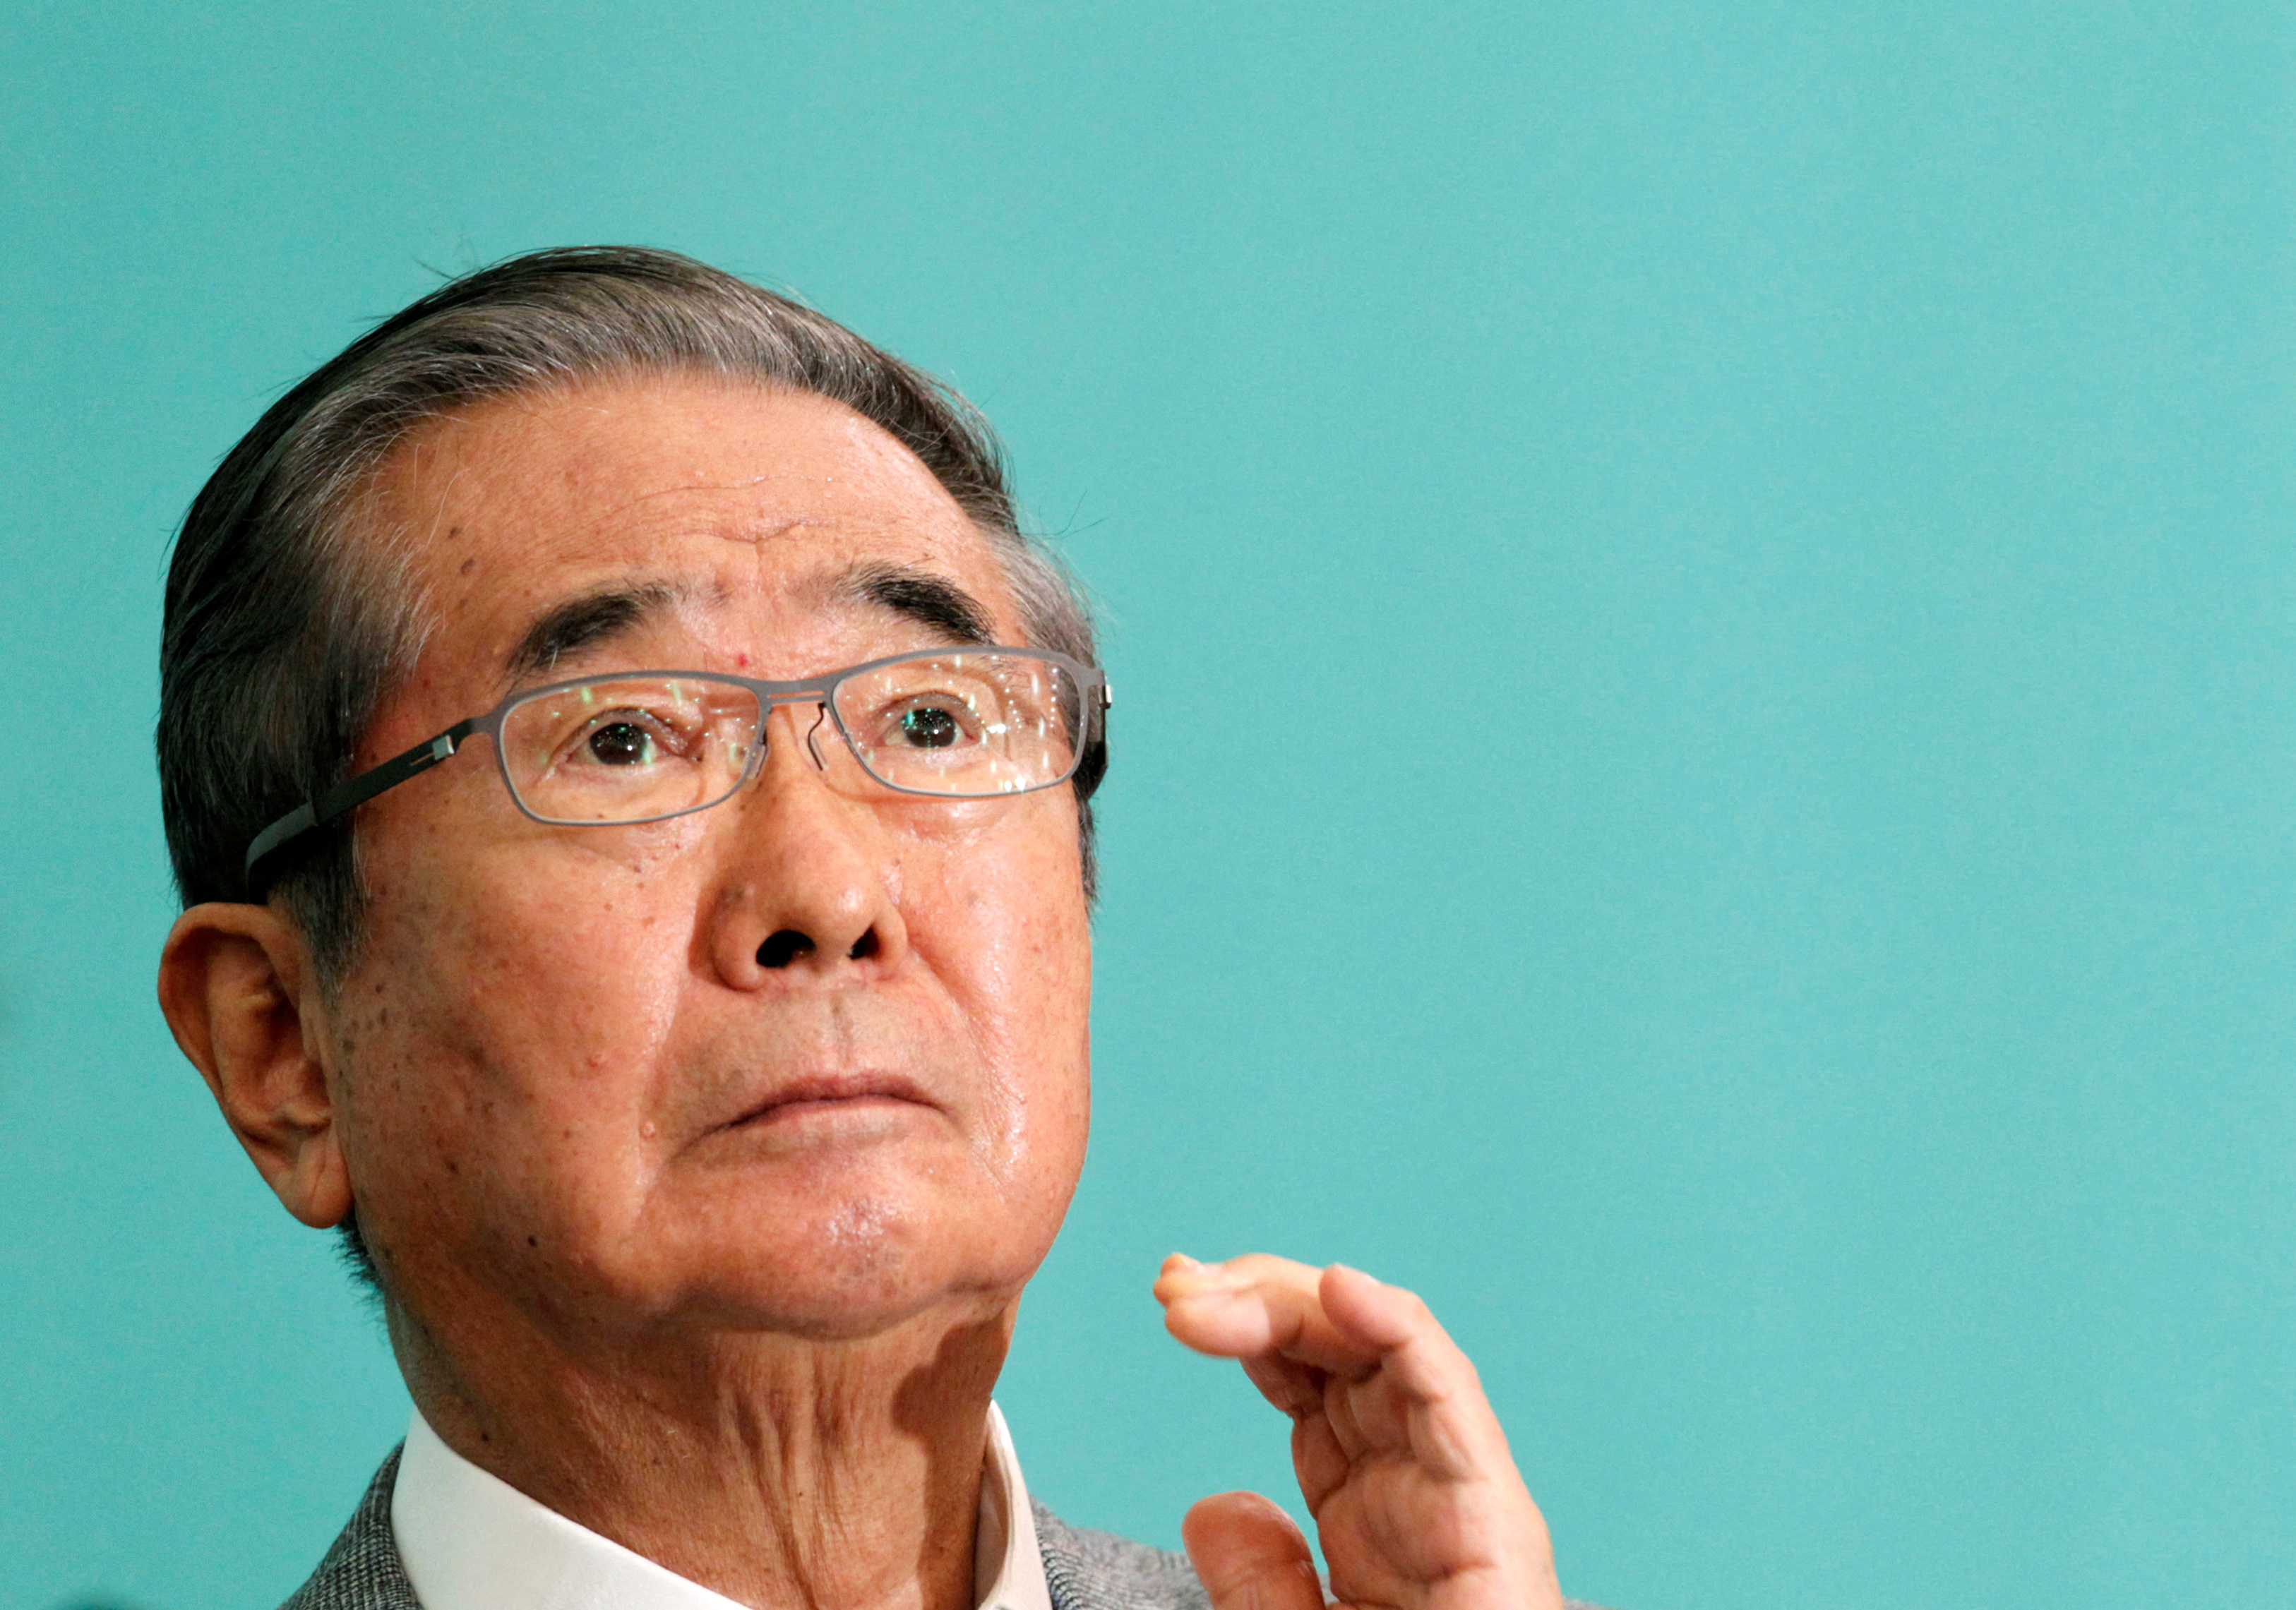 Japan Restoration Party leader and former Tokyo Governor Ishihara attends a debate in Tokyo